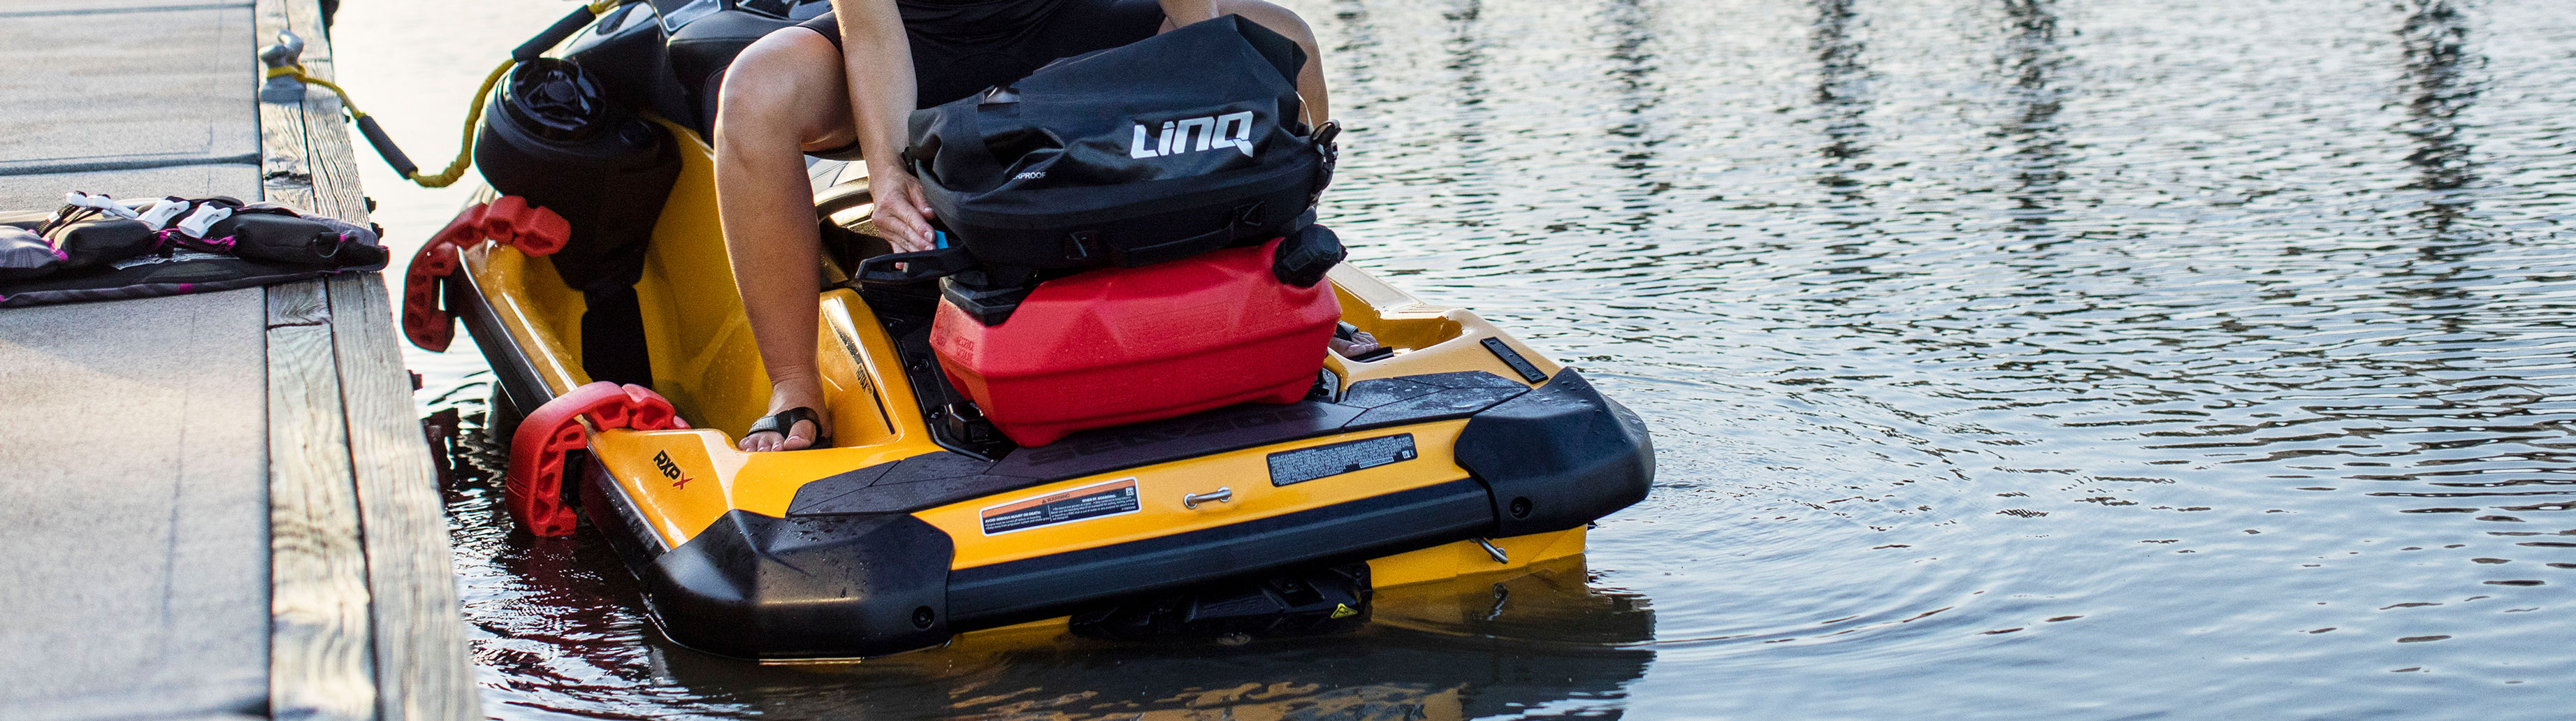 What type of gas do I put in my Sea-Doo? 